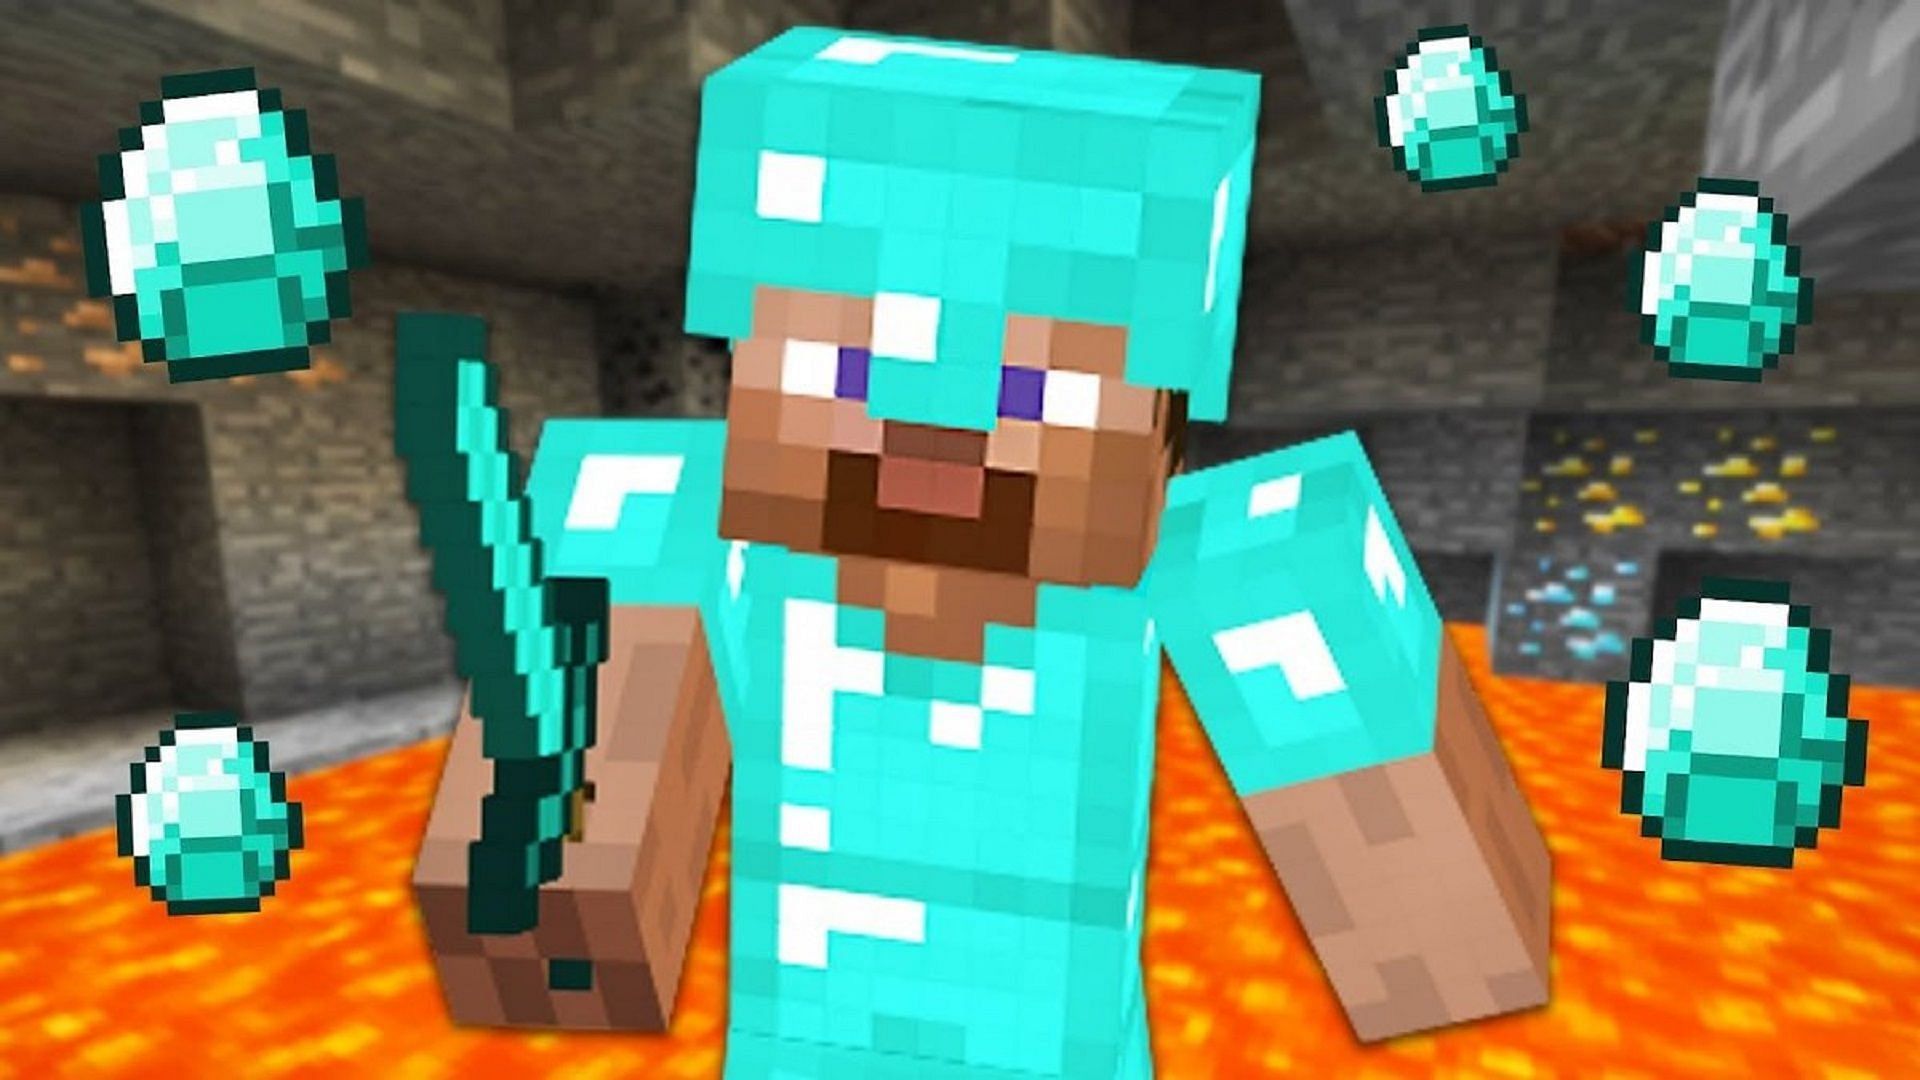 There are more than a few ways to snag diamonds in Minecraft (Image via MisterKey/YouTube)